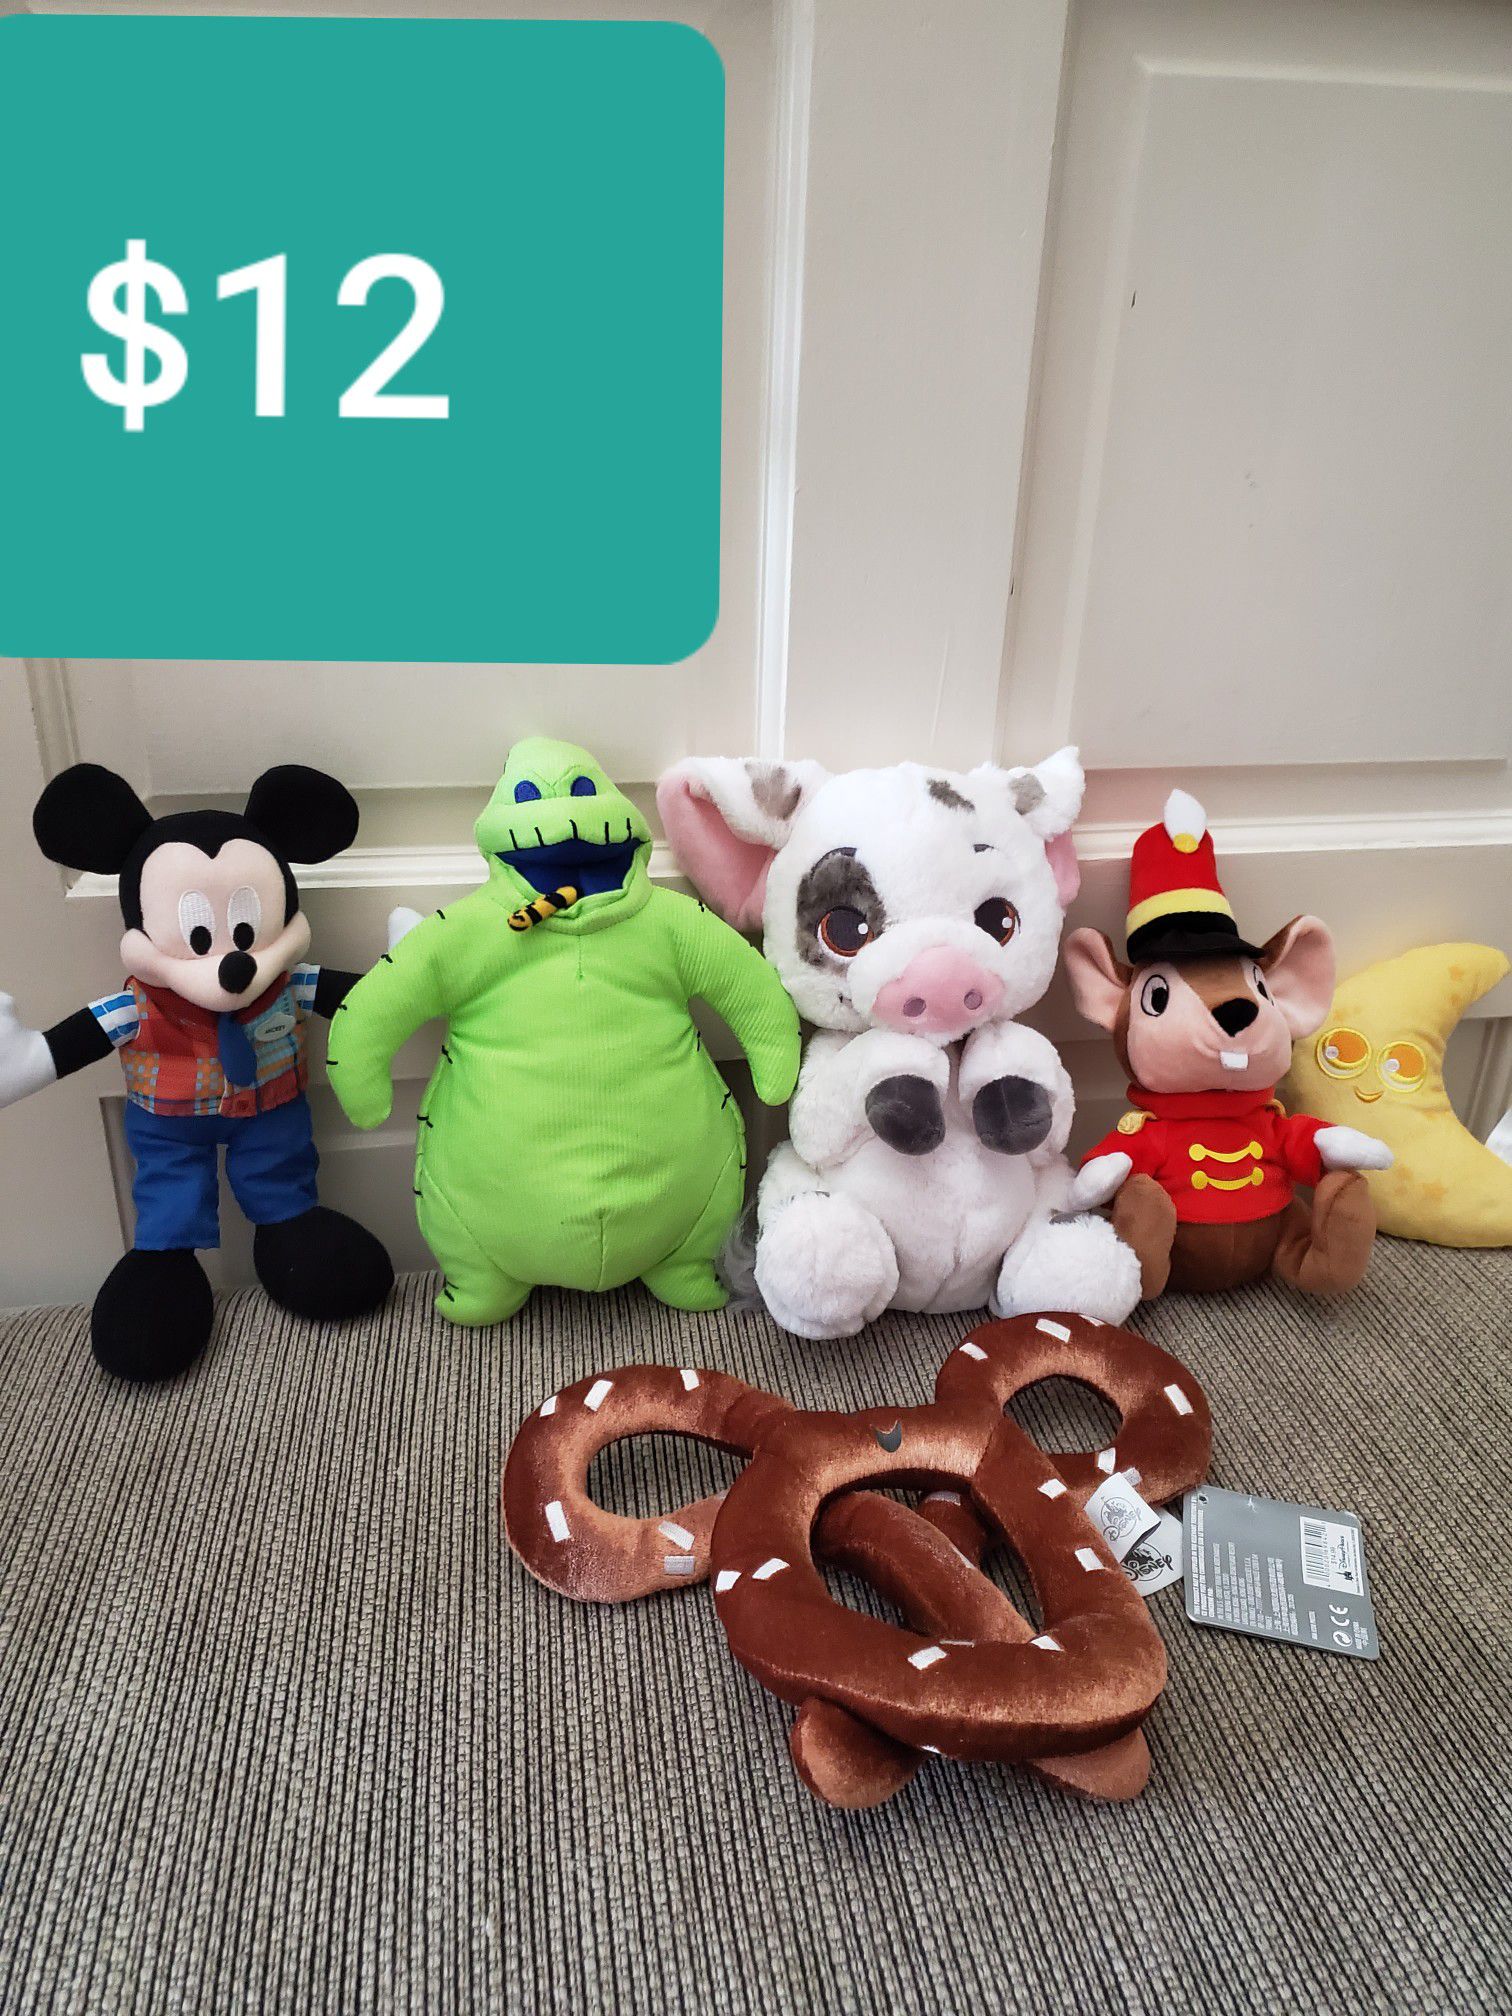 DISNEYLAND PARKS PLUSH COLLECTION -6PIECE. ALL FOR $12